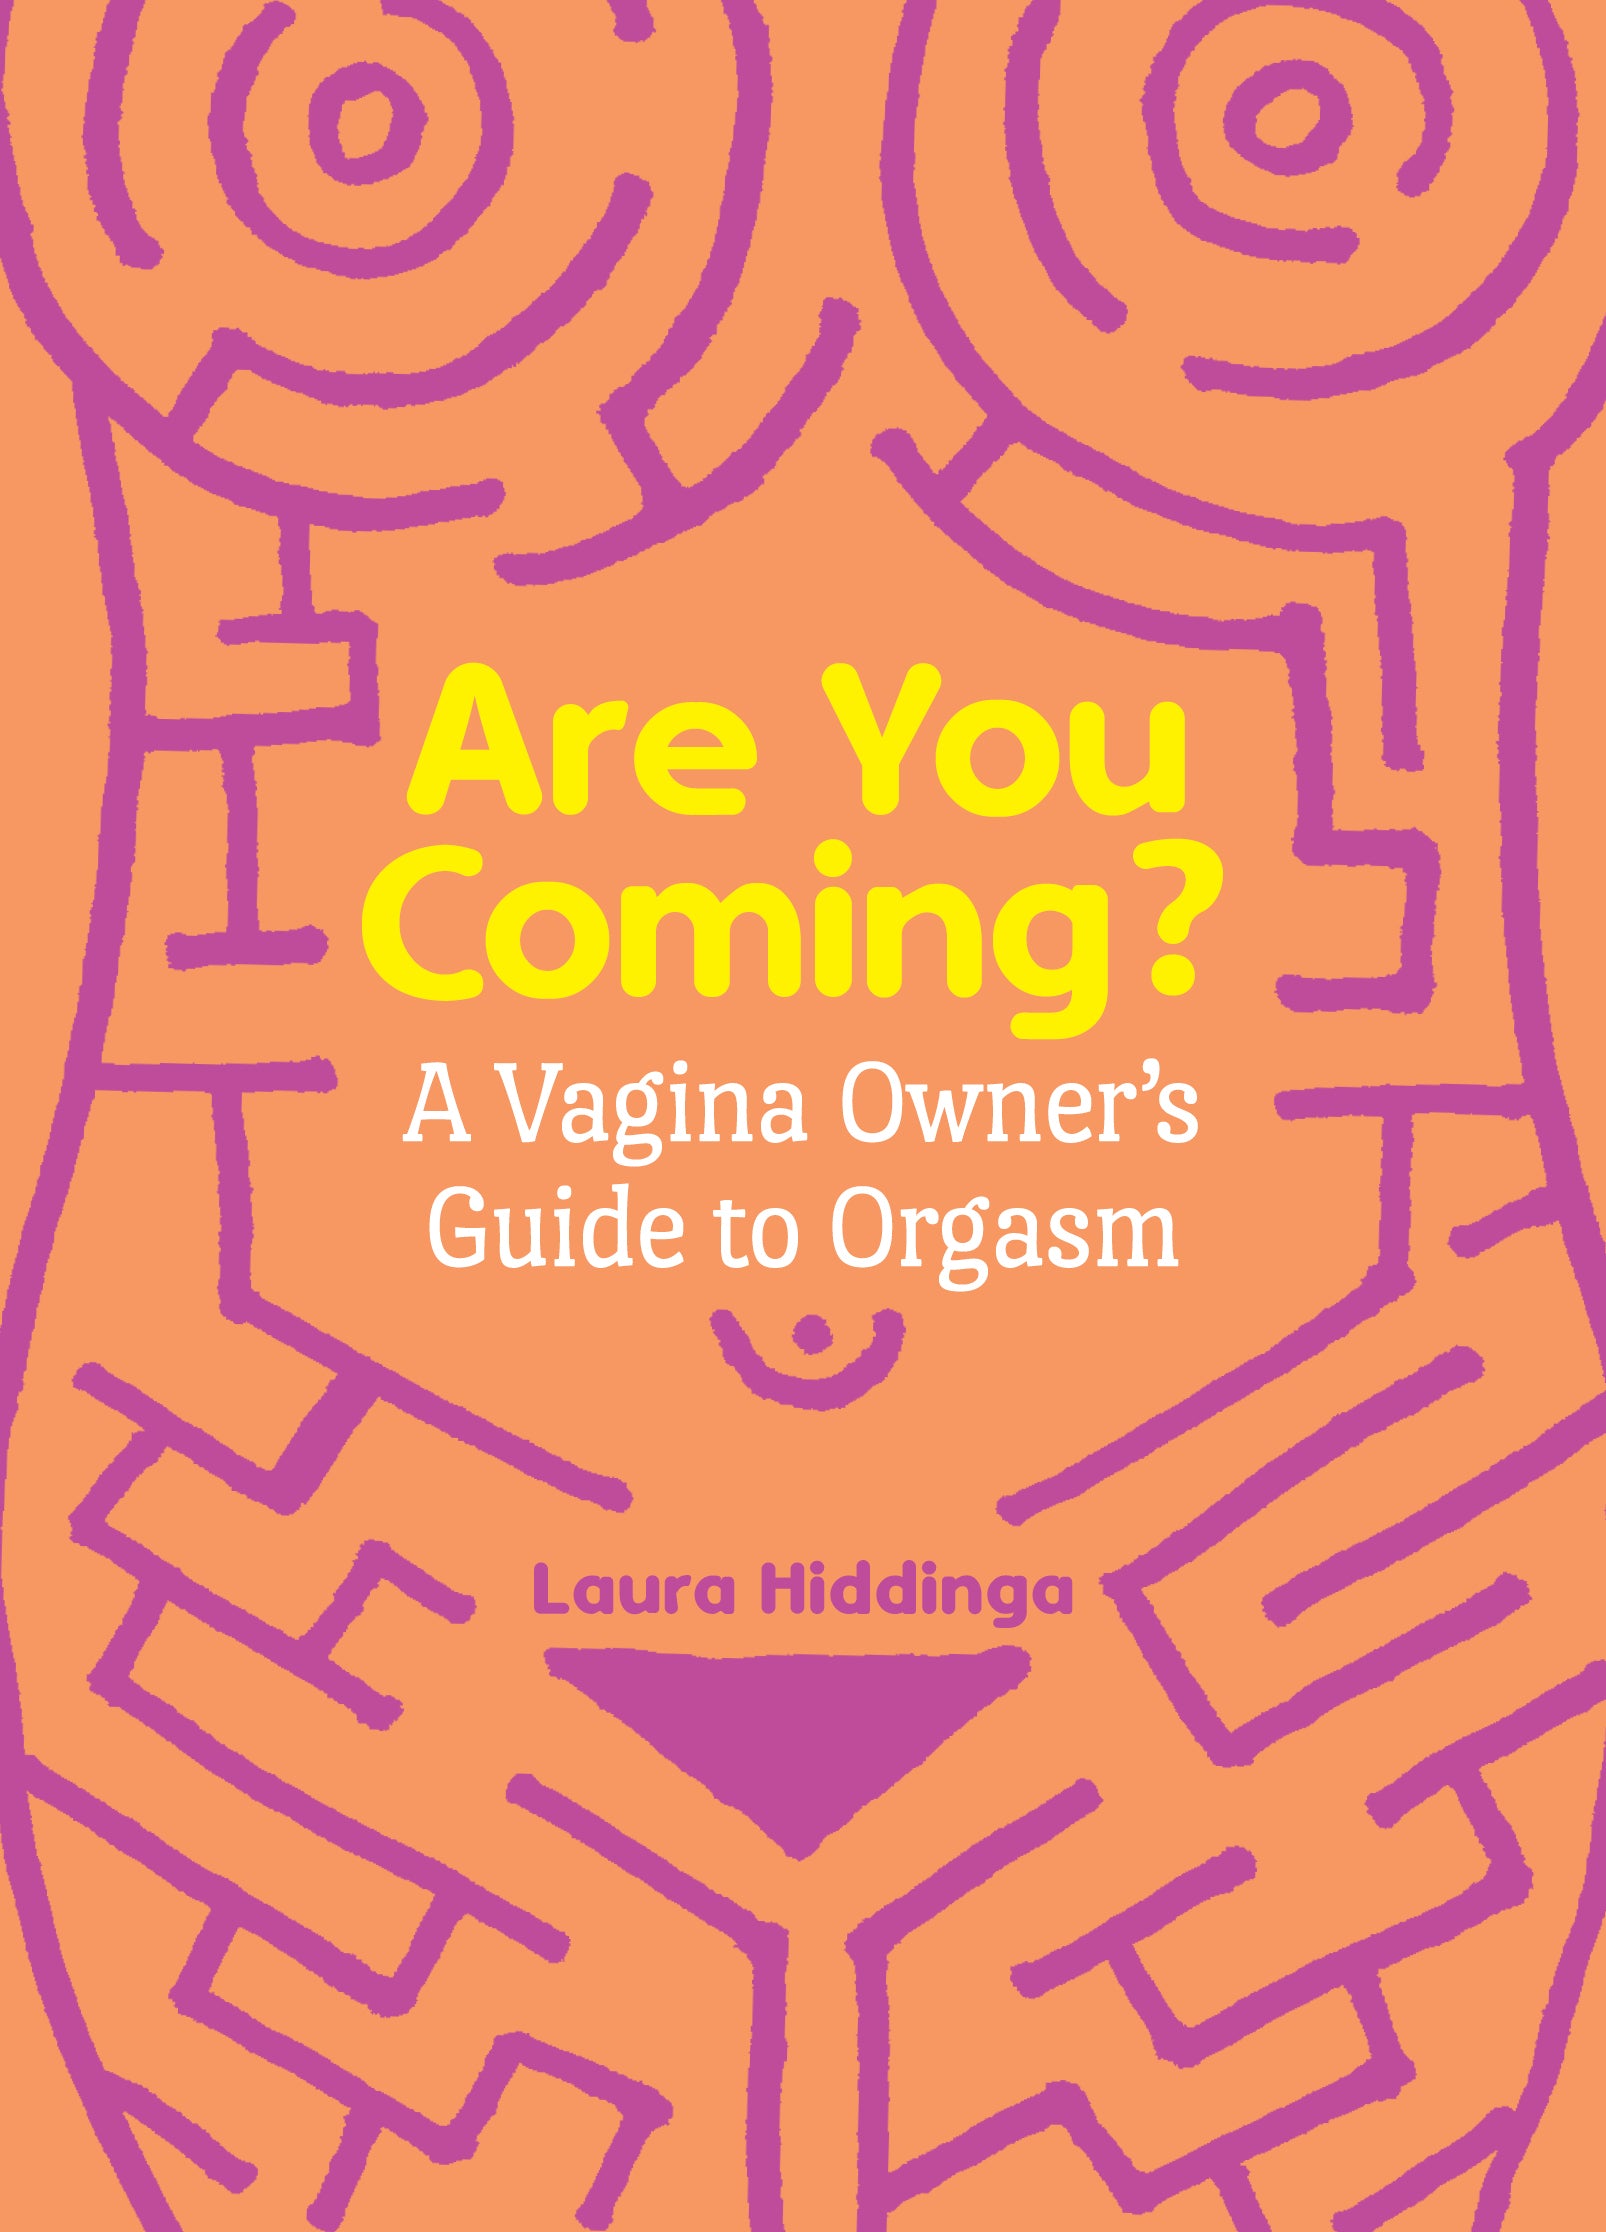 Cover reads "Are You Coming? A vagina owner's guide to orgasm"